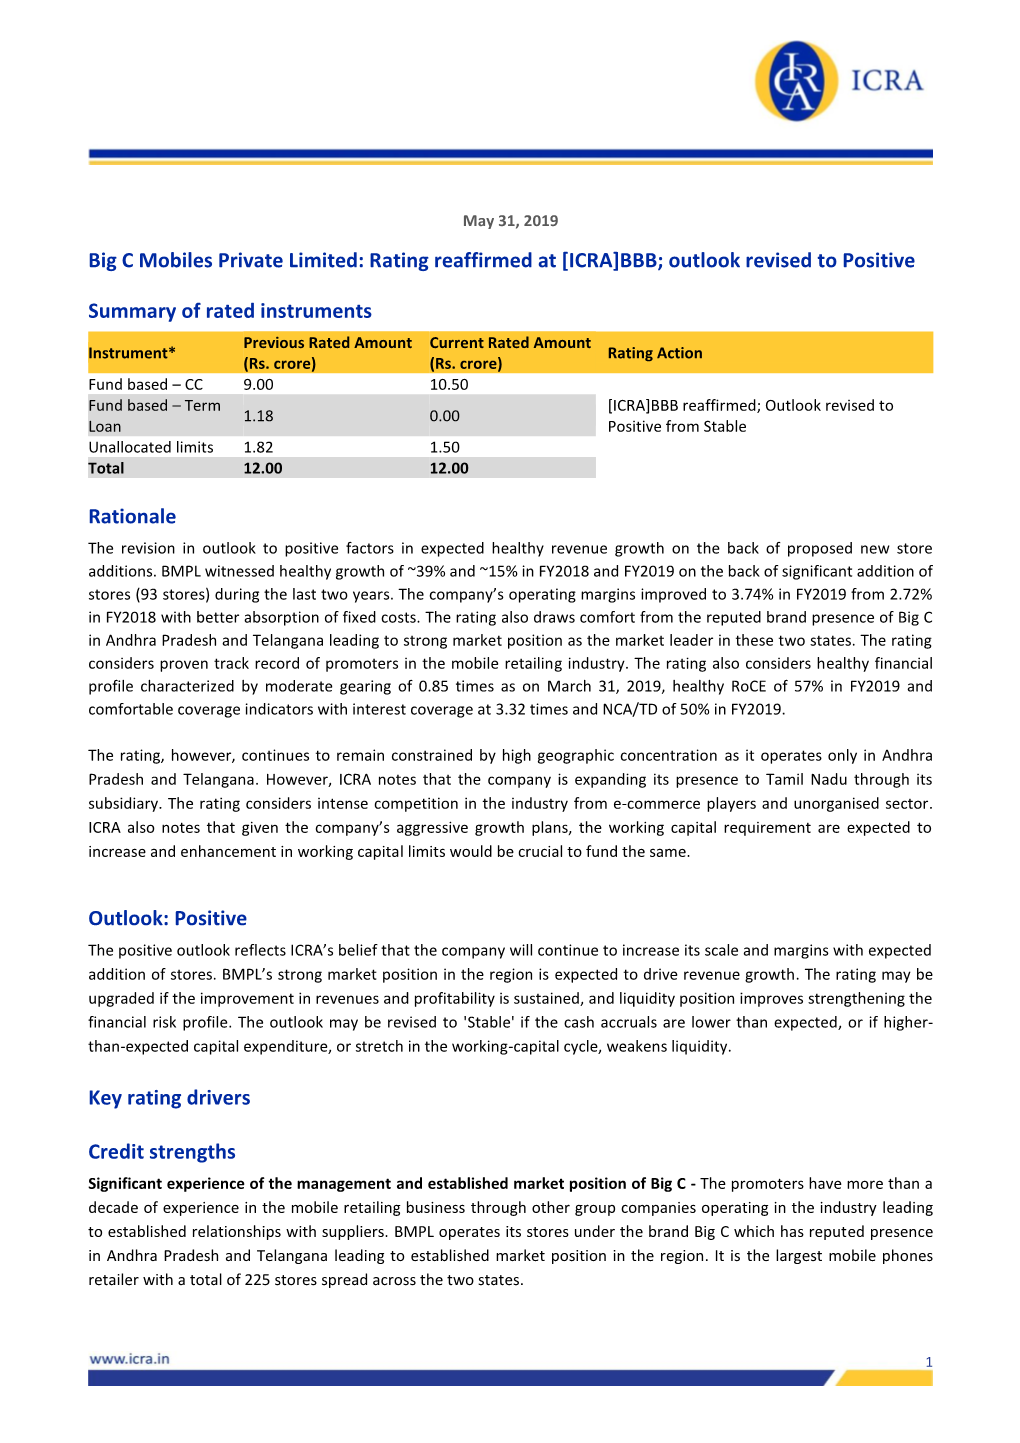 Big C Mobiles Private Limited: Rating Reaffirmed at [ICRA]BBB; Outlook Revised to Positive